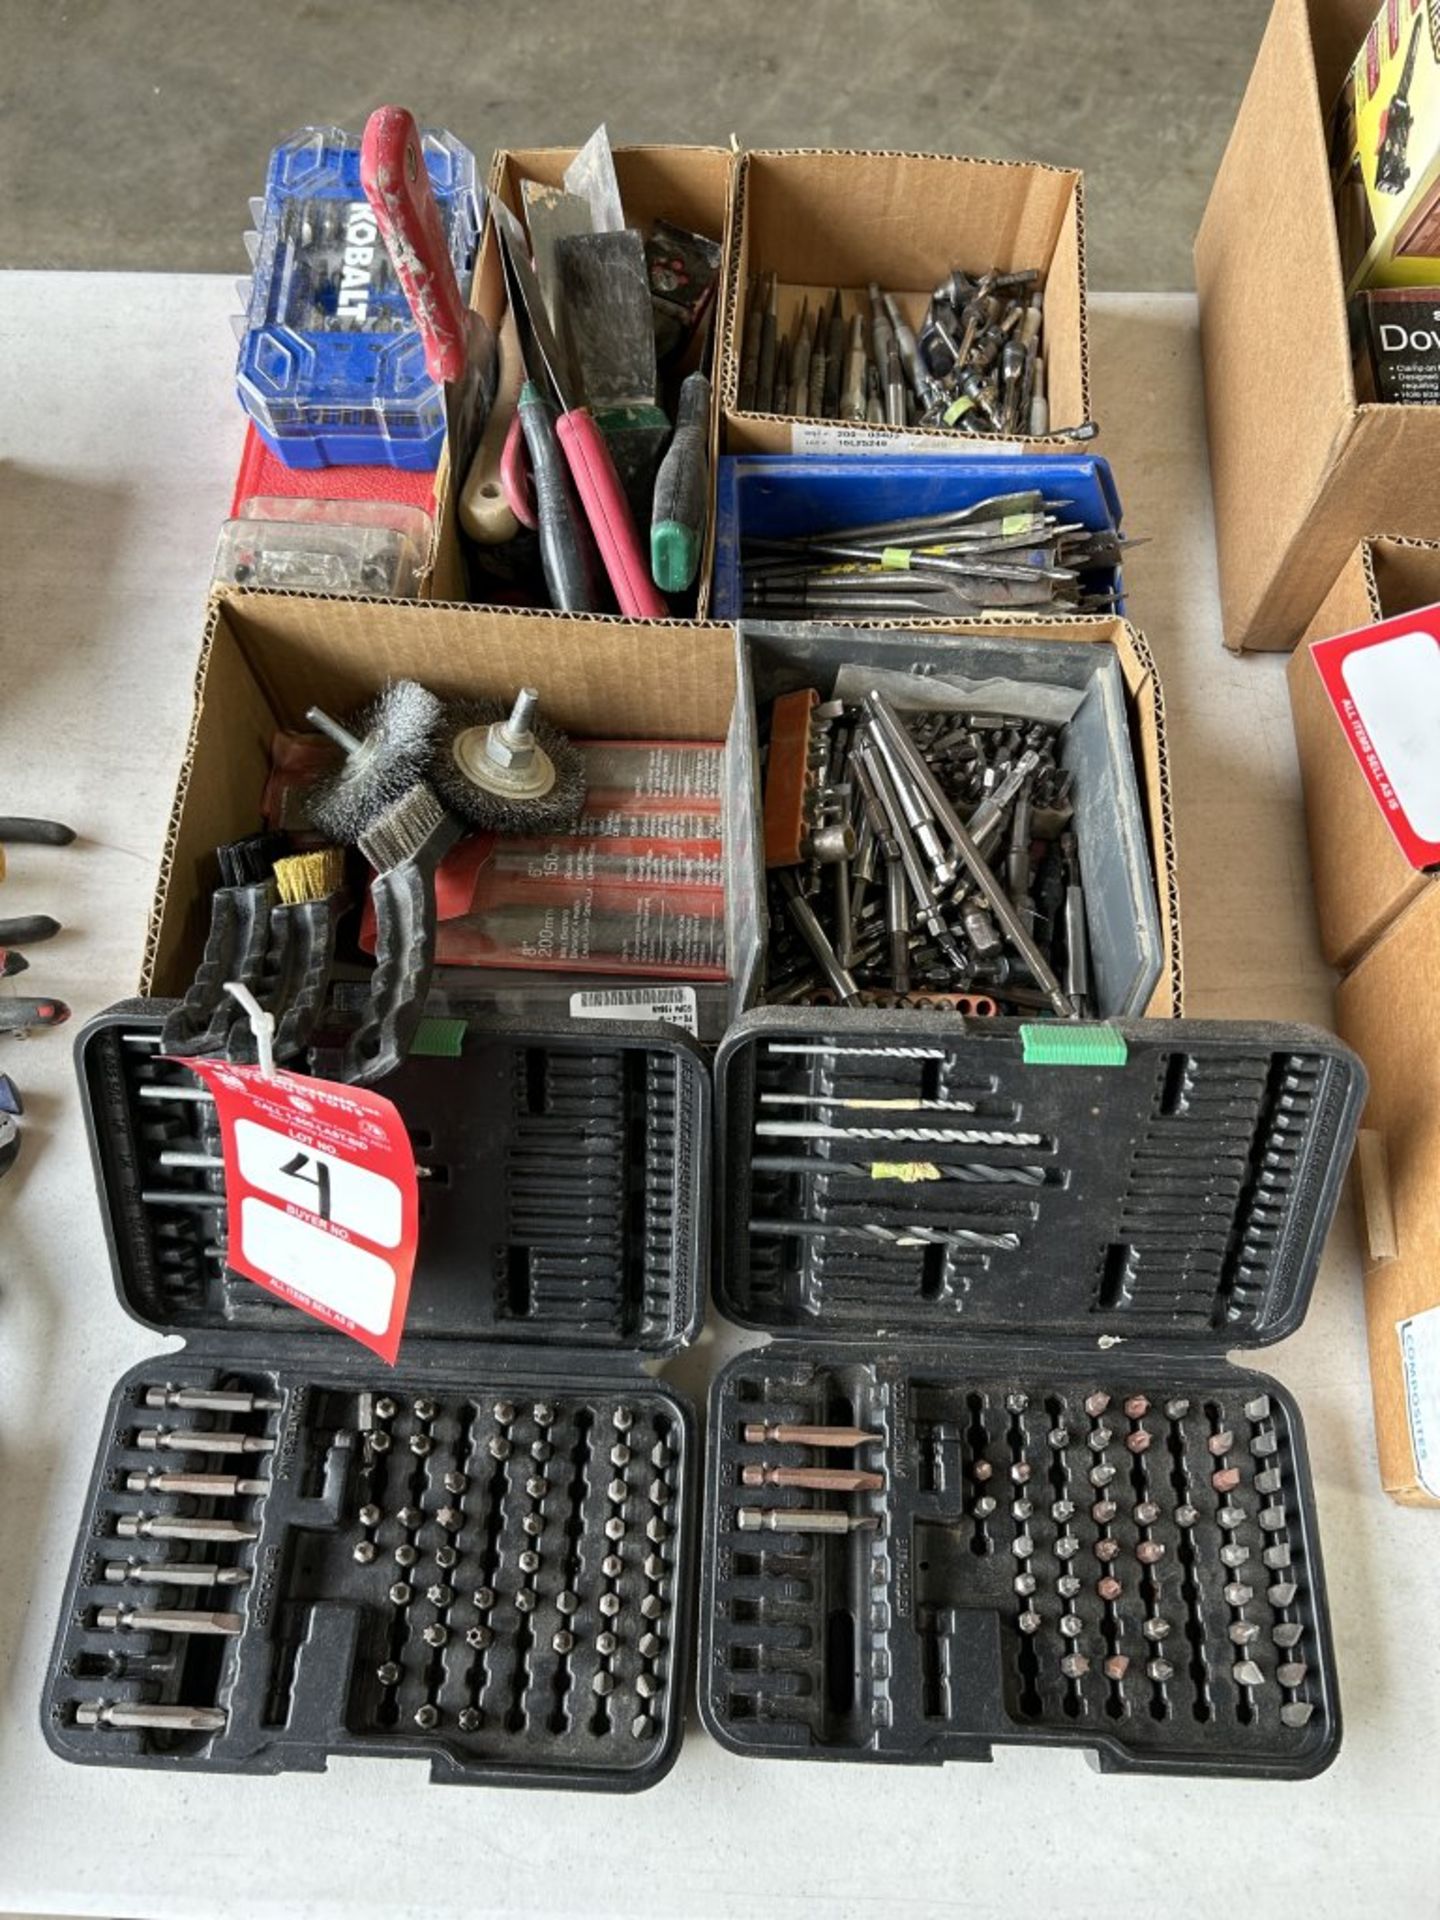 ASSORTED HAND TOOLS AND DRILL BITS, SCRAPERS, FILES, ETC.